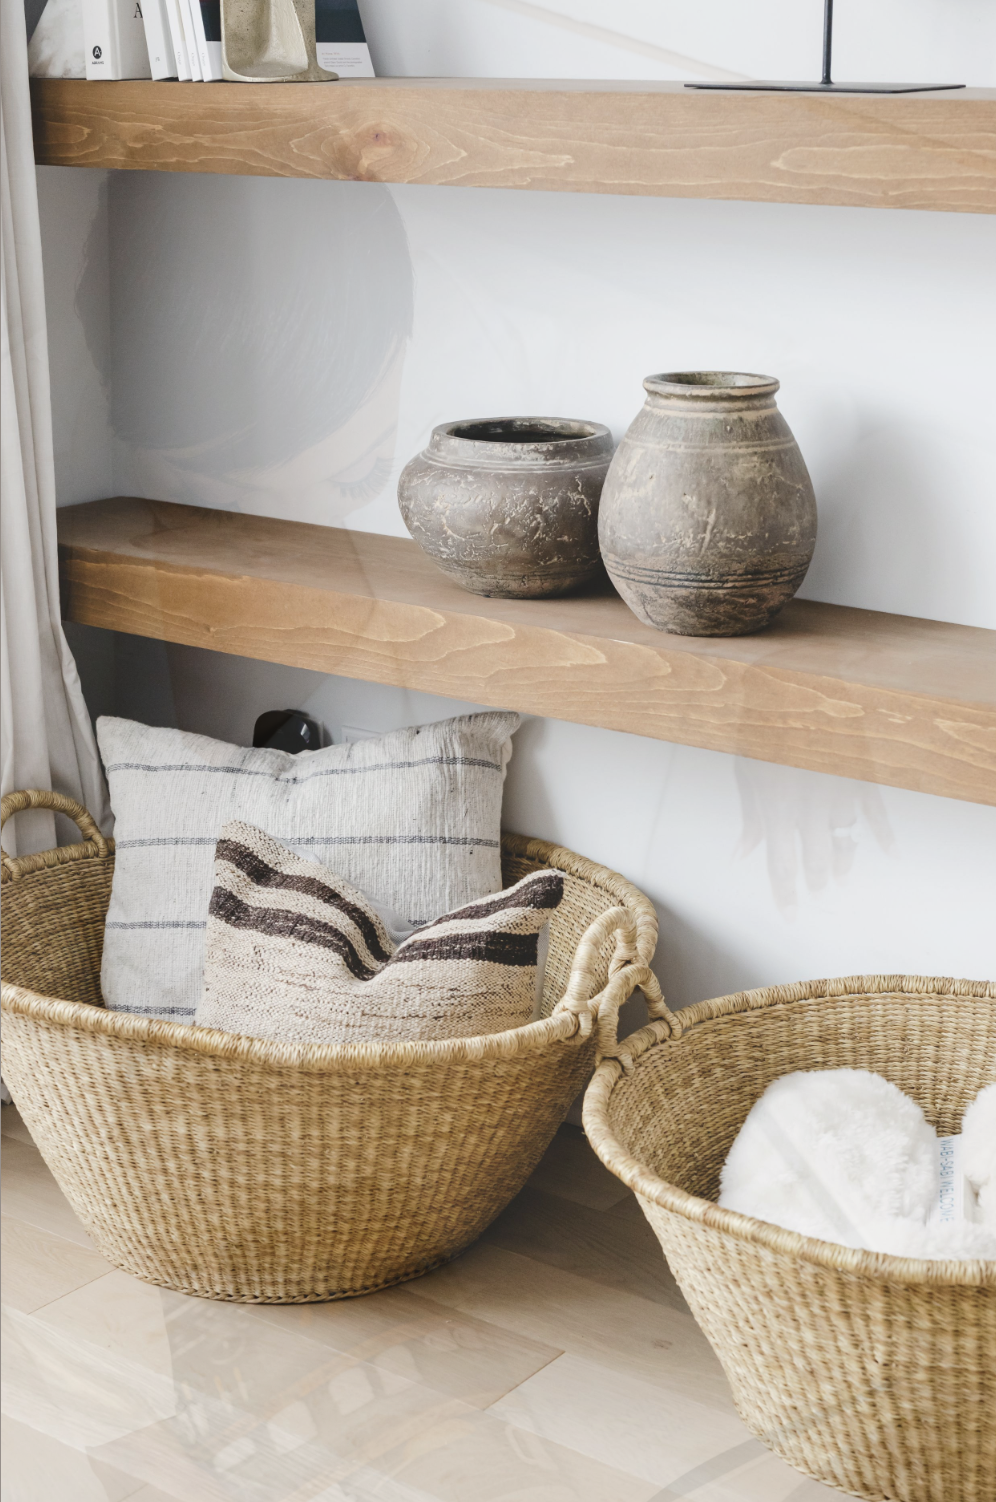 woven-basket-and-ceramic-vases